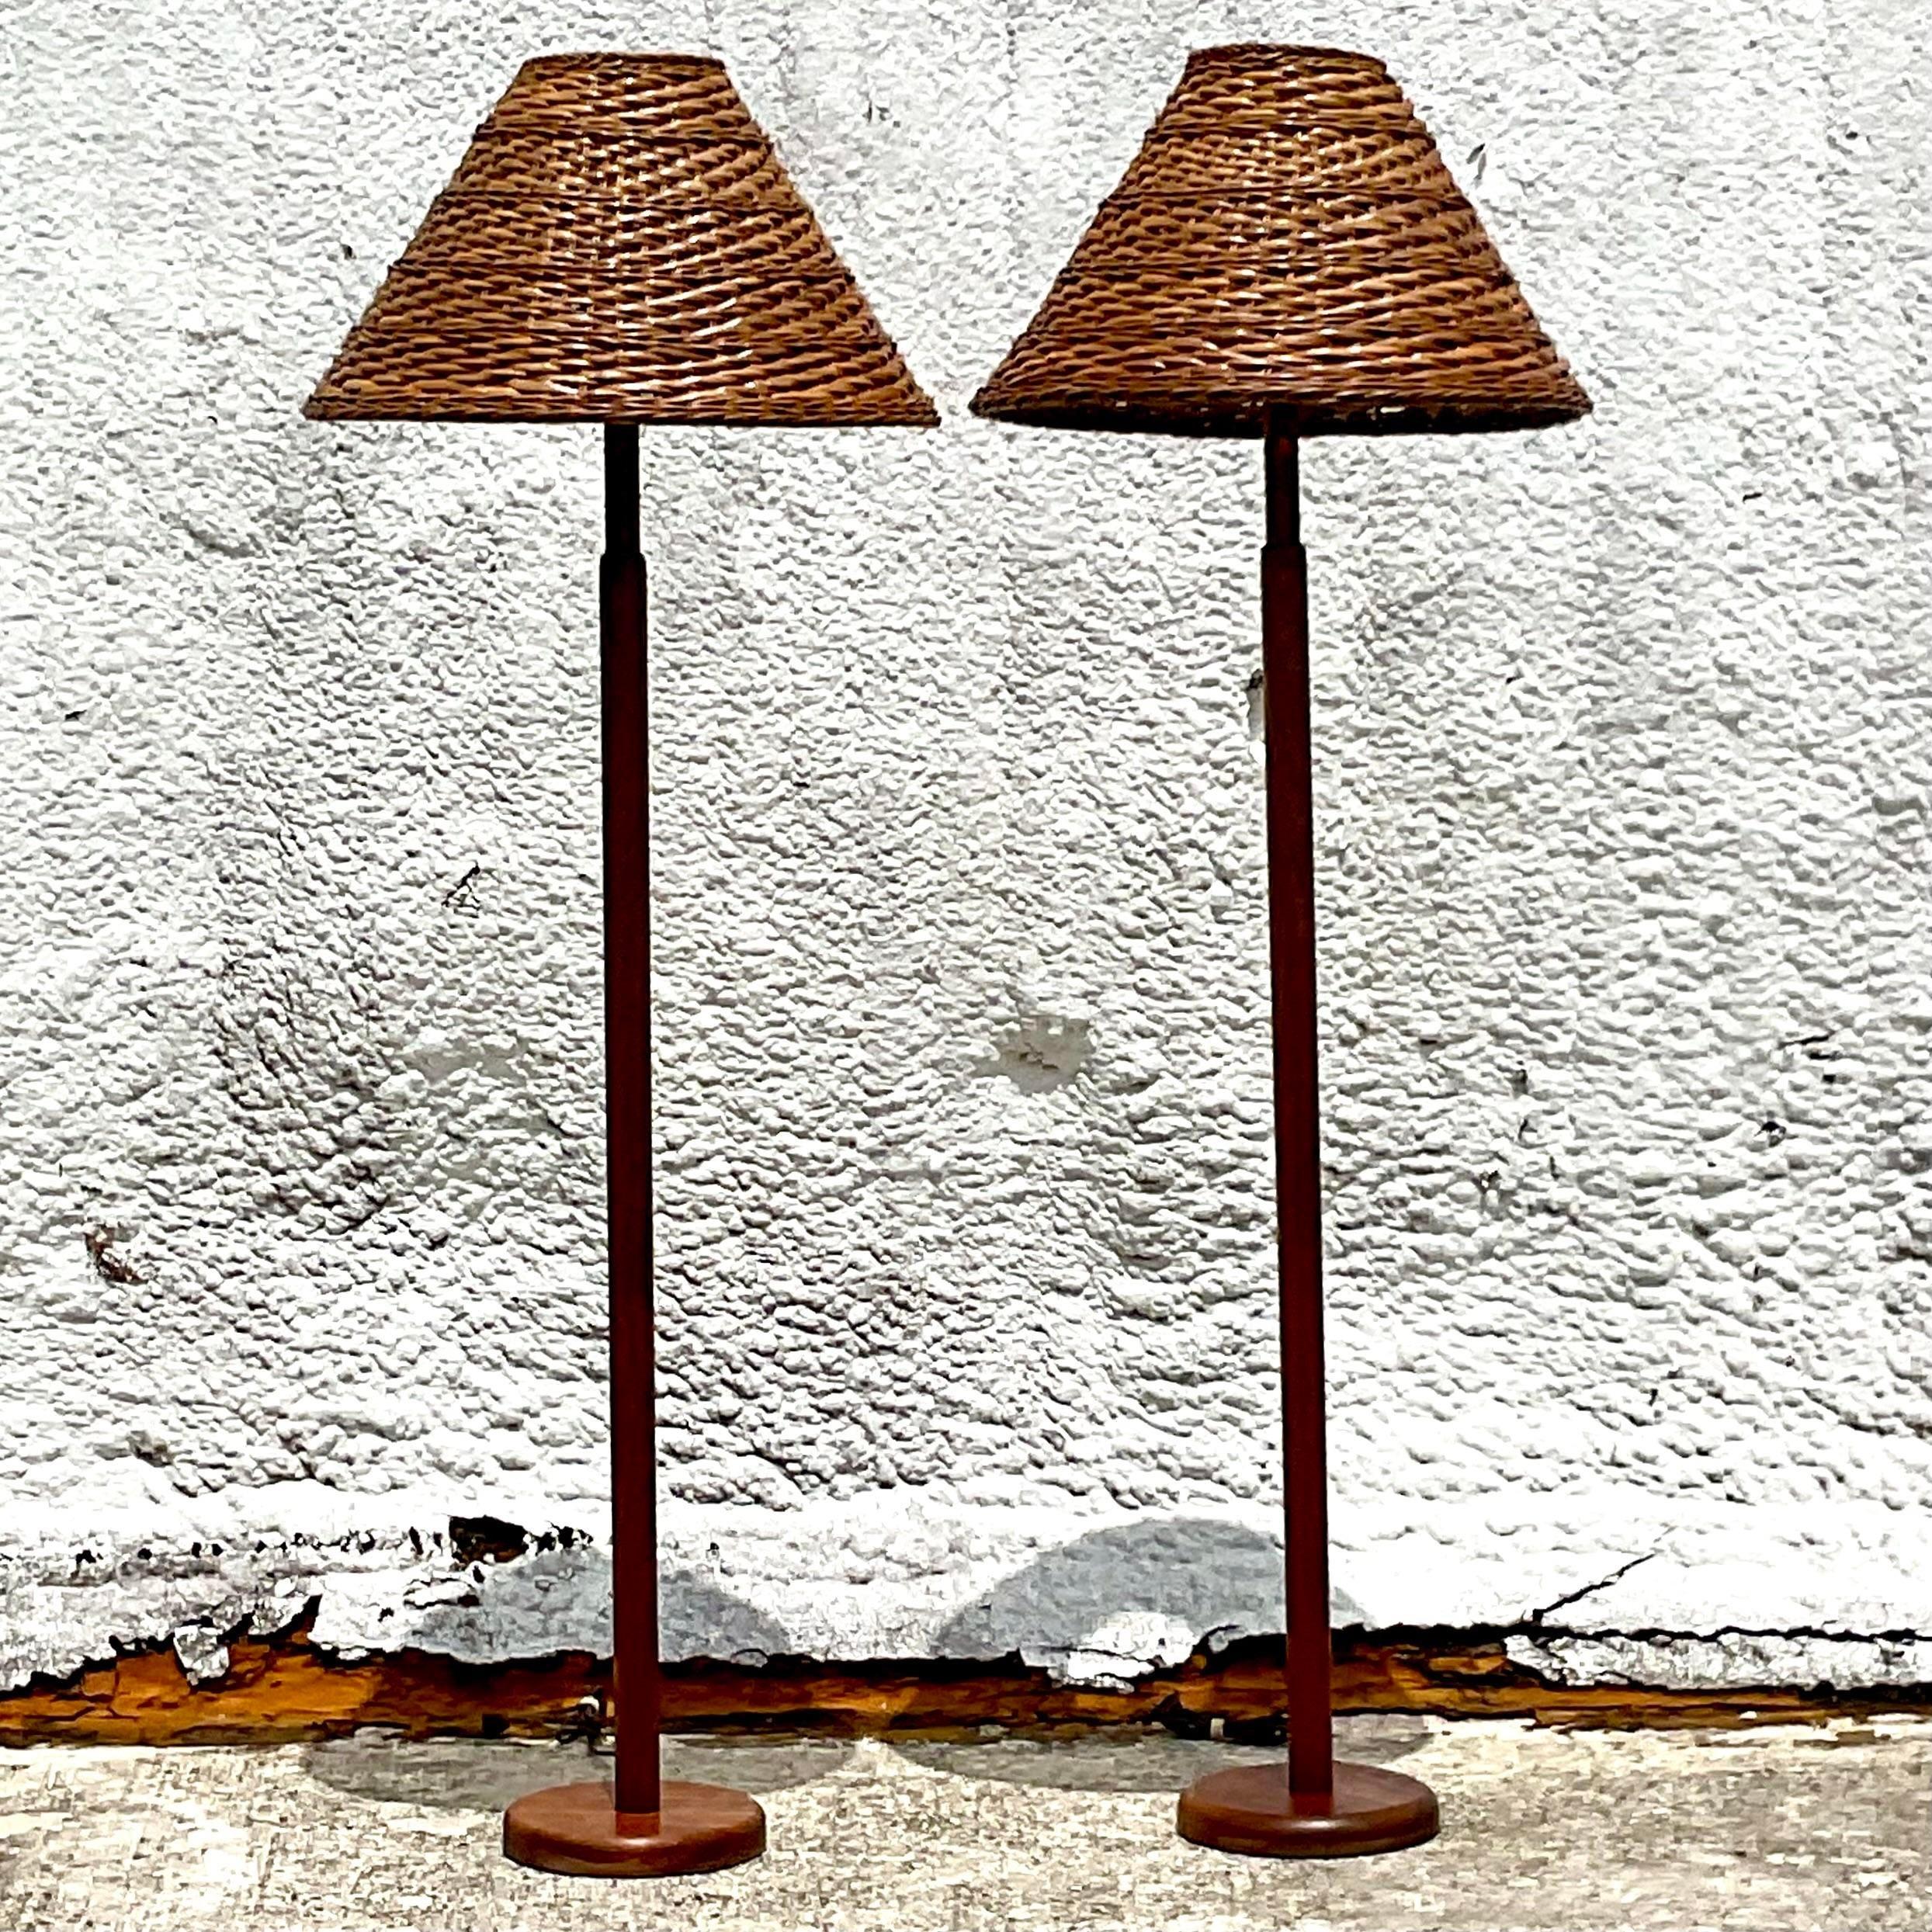 A fabulous pair of vintage Coastal floor lamps. Gorgeous MCM teak lamps in a simple and clean design. A great pair of woven rattan shades. Acquired from a Palm Beach estate.